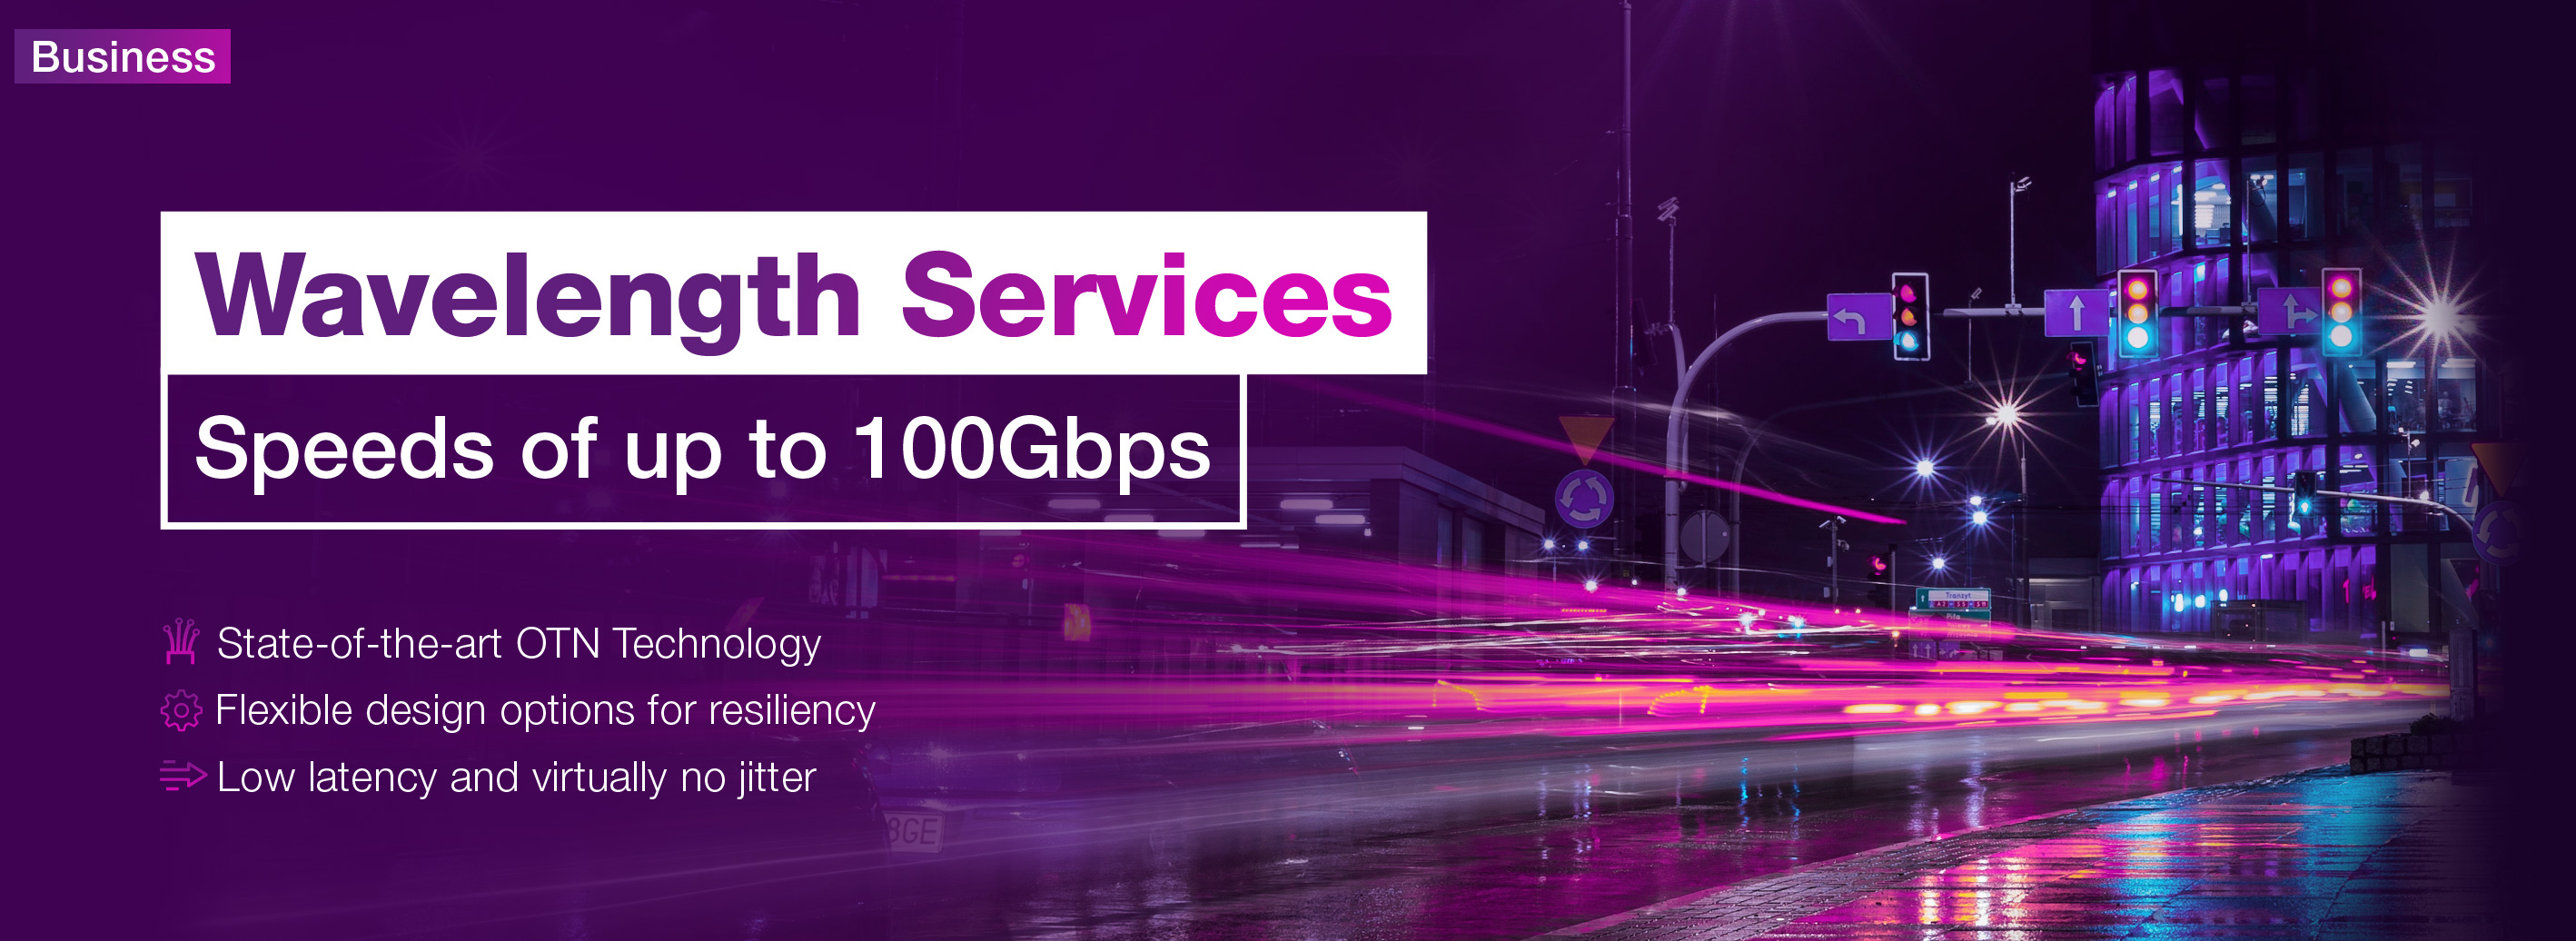 TPG Wavelength Services - speeds of up to 100Gbps